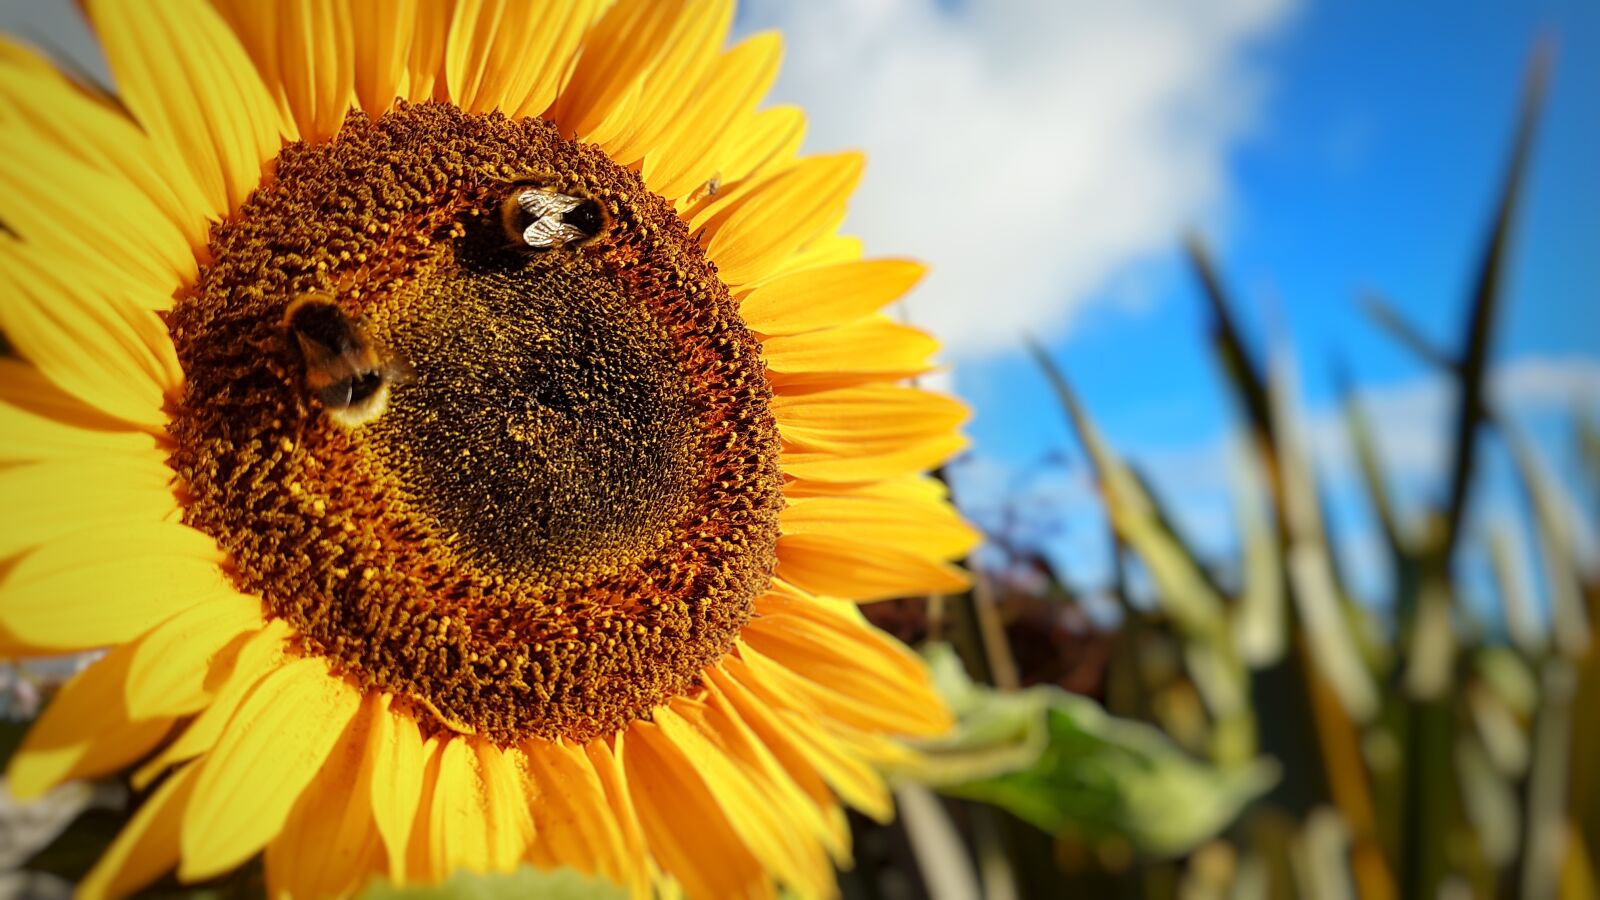 Samsung SM-G930F sample photo. Sunflower, bees, insect photography